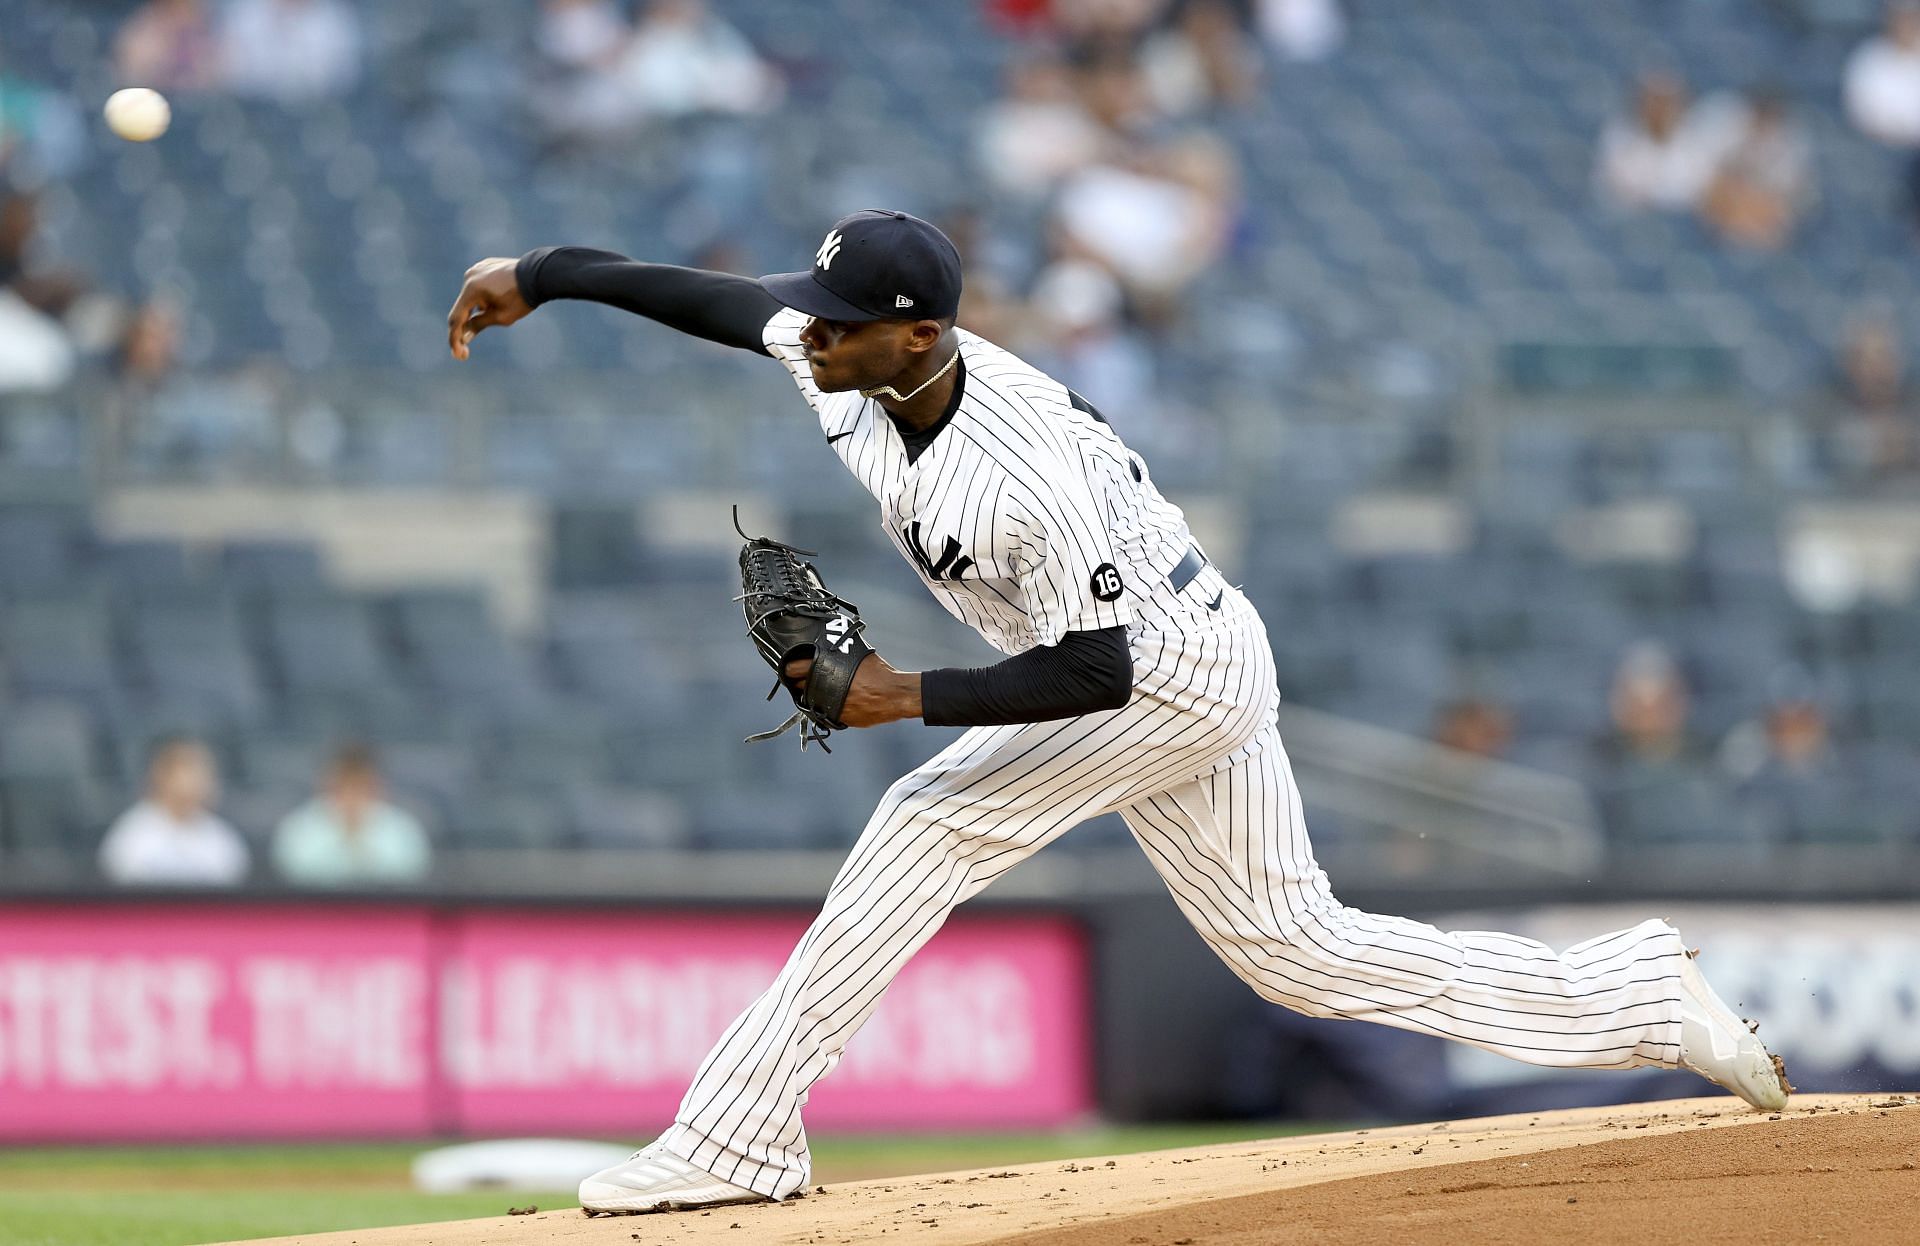 Domingo German pitching for the New York Yankees